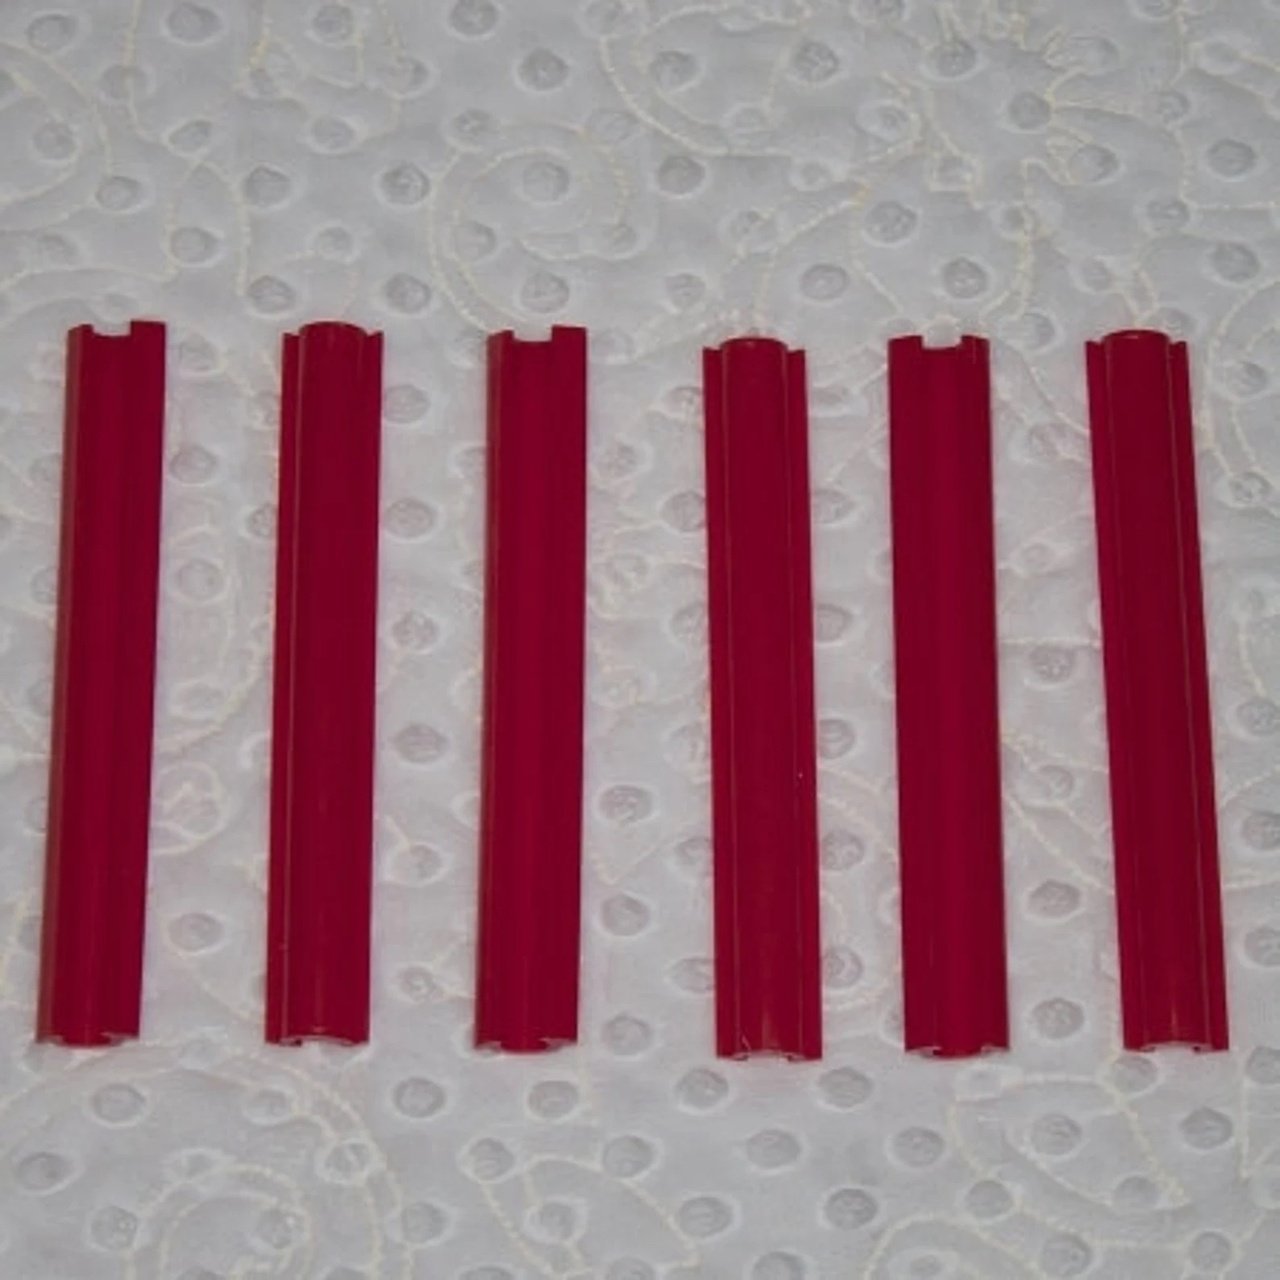 Extra Red Snapper Clamp Sets